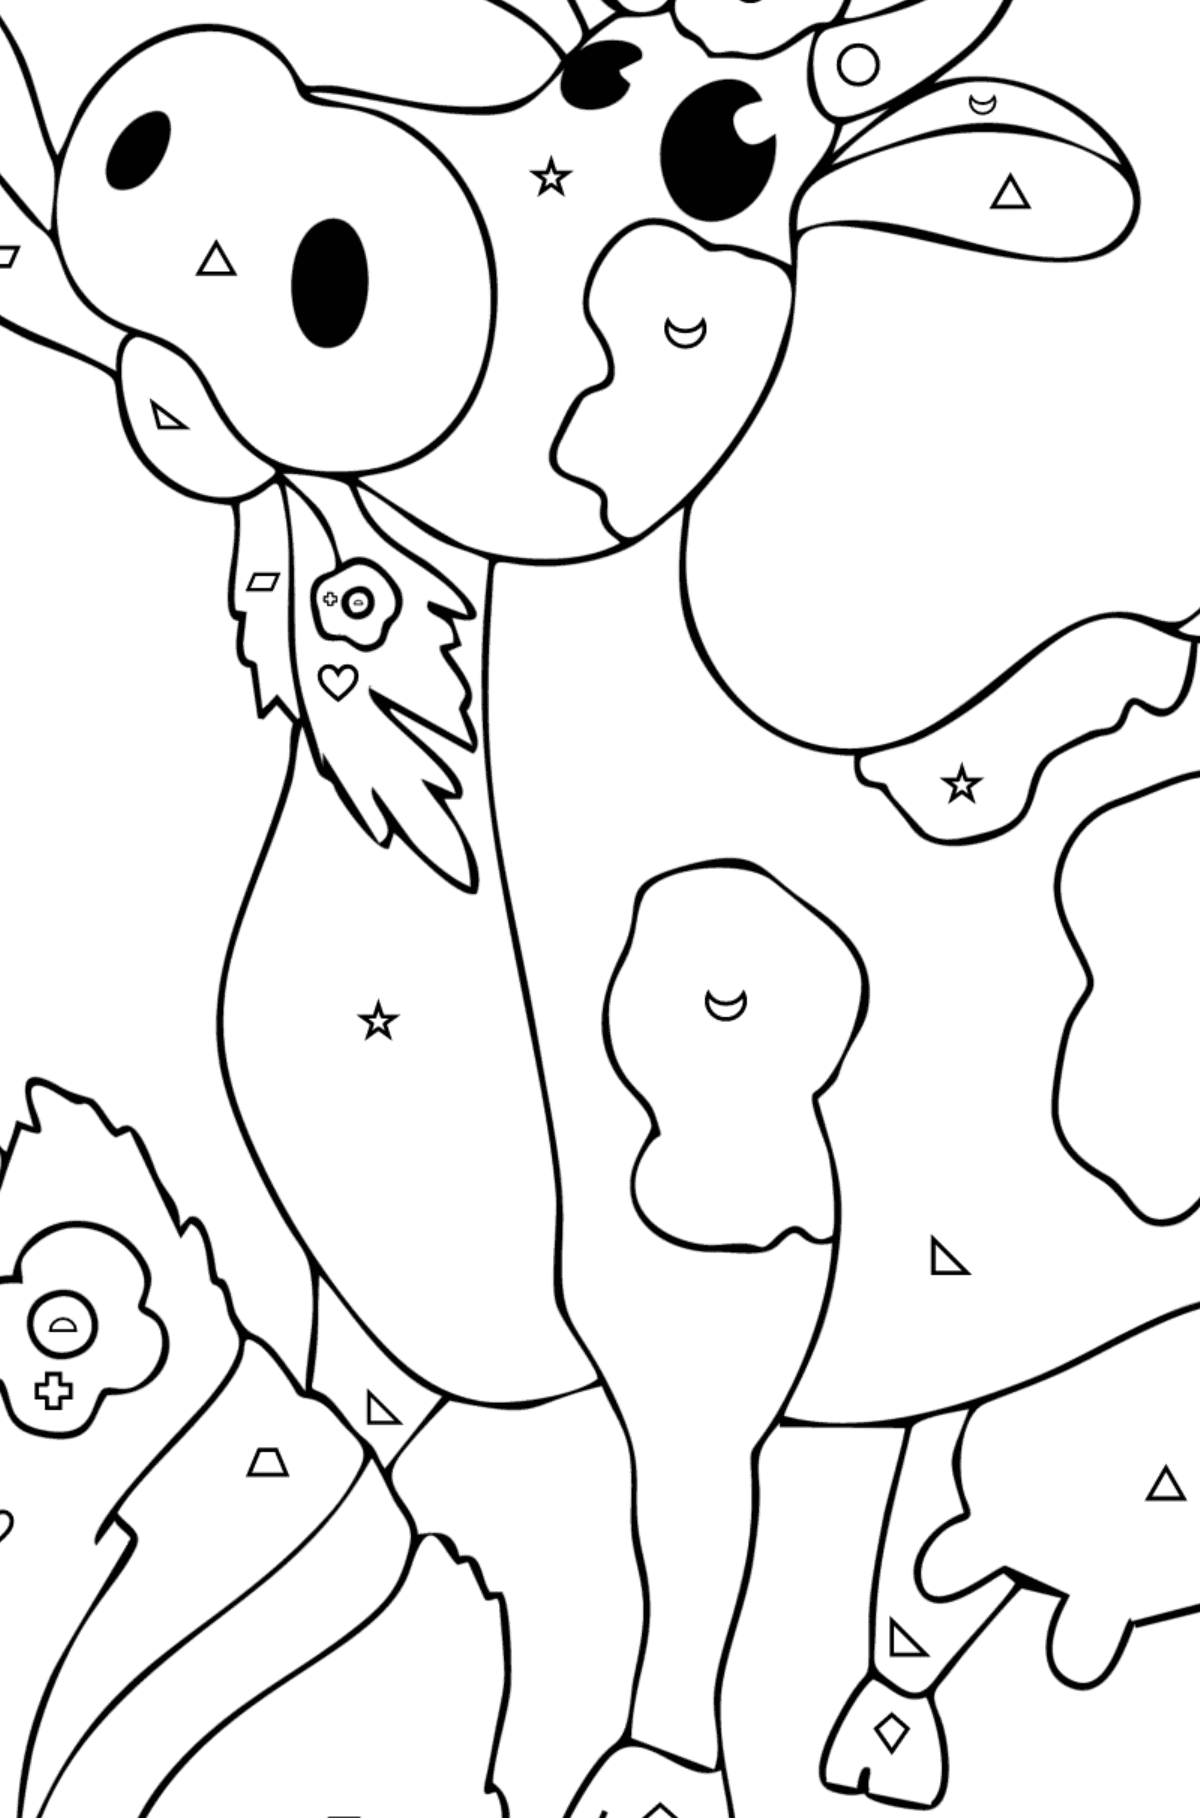 Coloring page Cow with hay - Coloring by Geometric Shapes for Kids